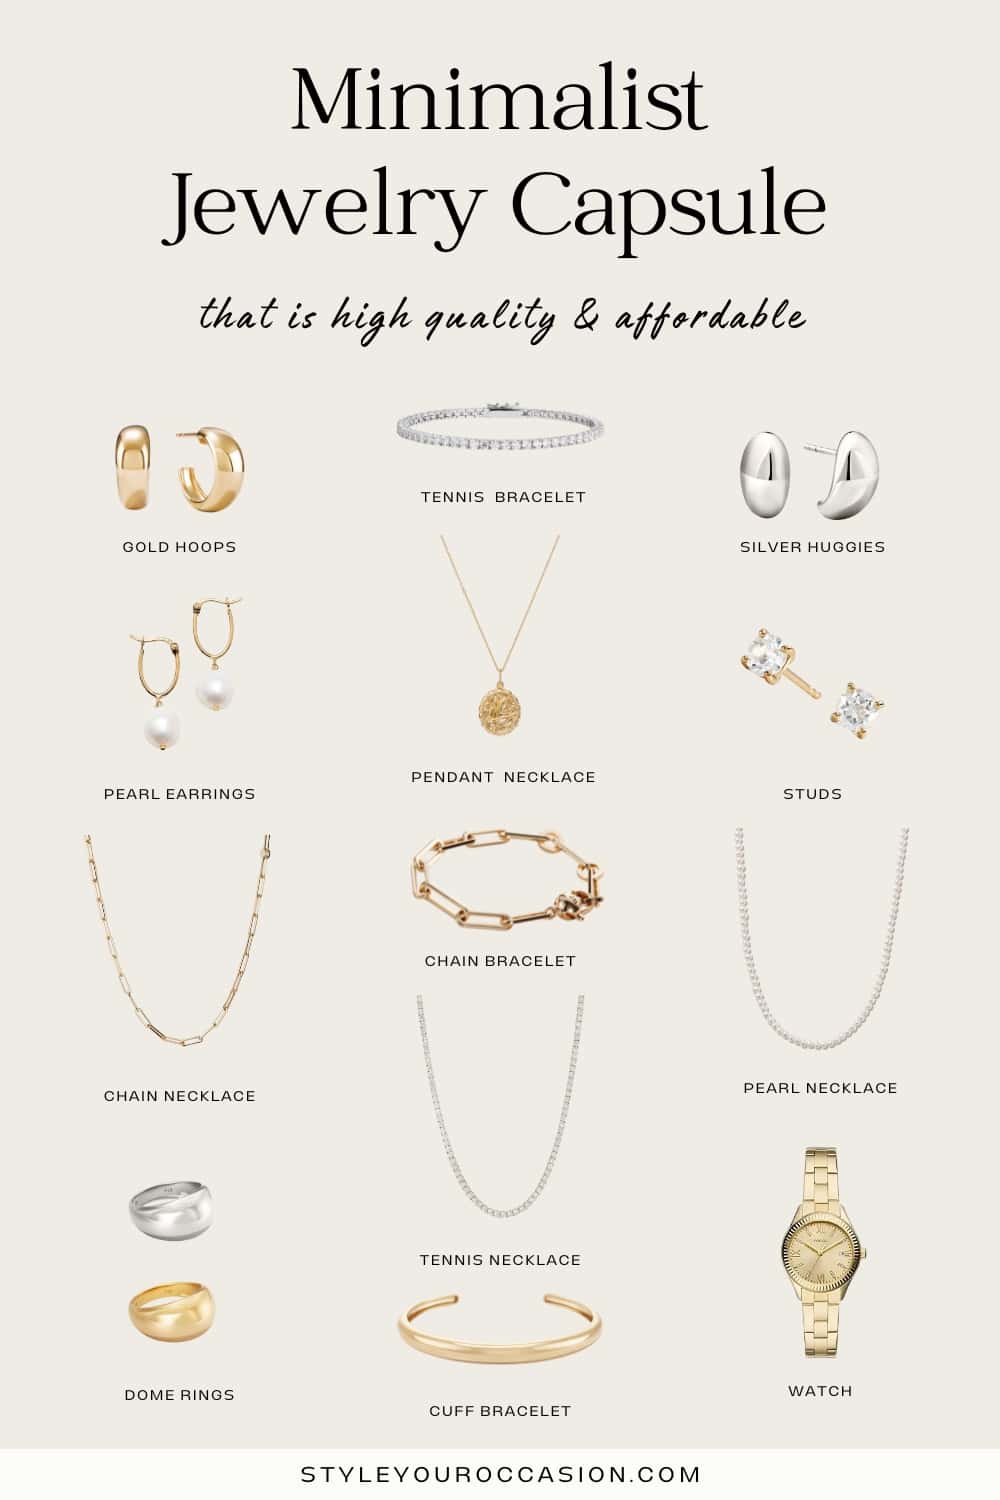 An image board of a minimalist jewelry capsule with high-quality and affordable pieces